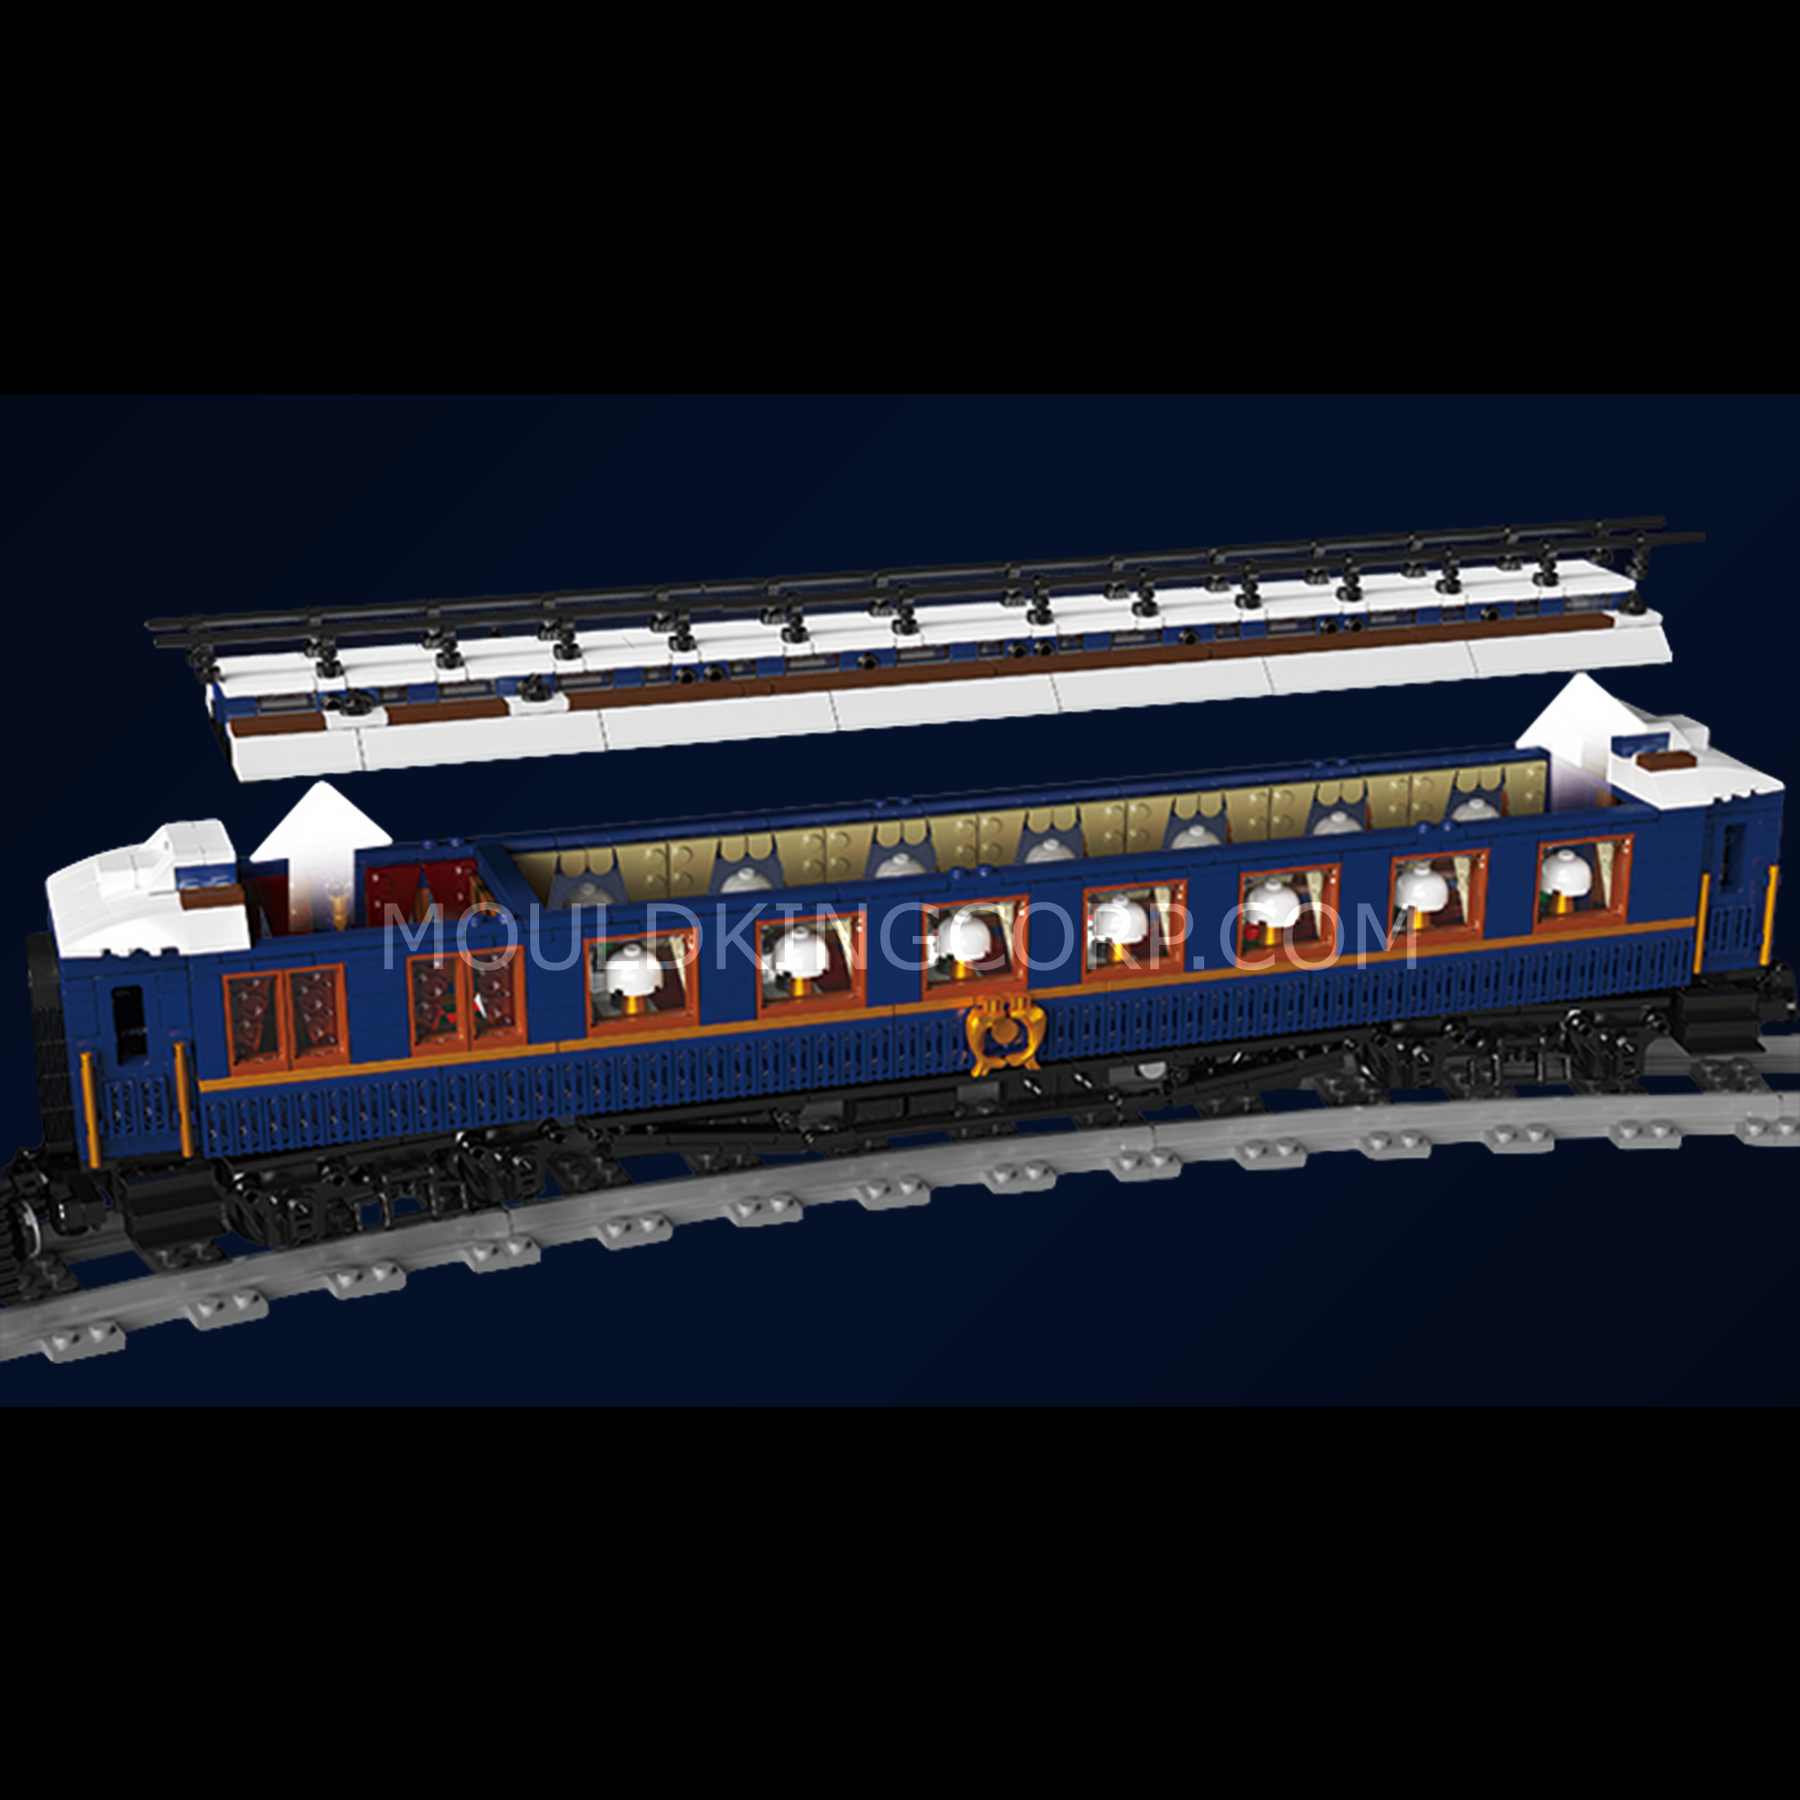 Technician MOULD KING 12025 Orient Express-French Railways SNCF 231 Steam Locomotive  Train With Motor, by Lepin Land Merchandise Store, Sep, 2023